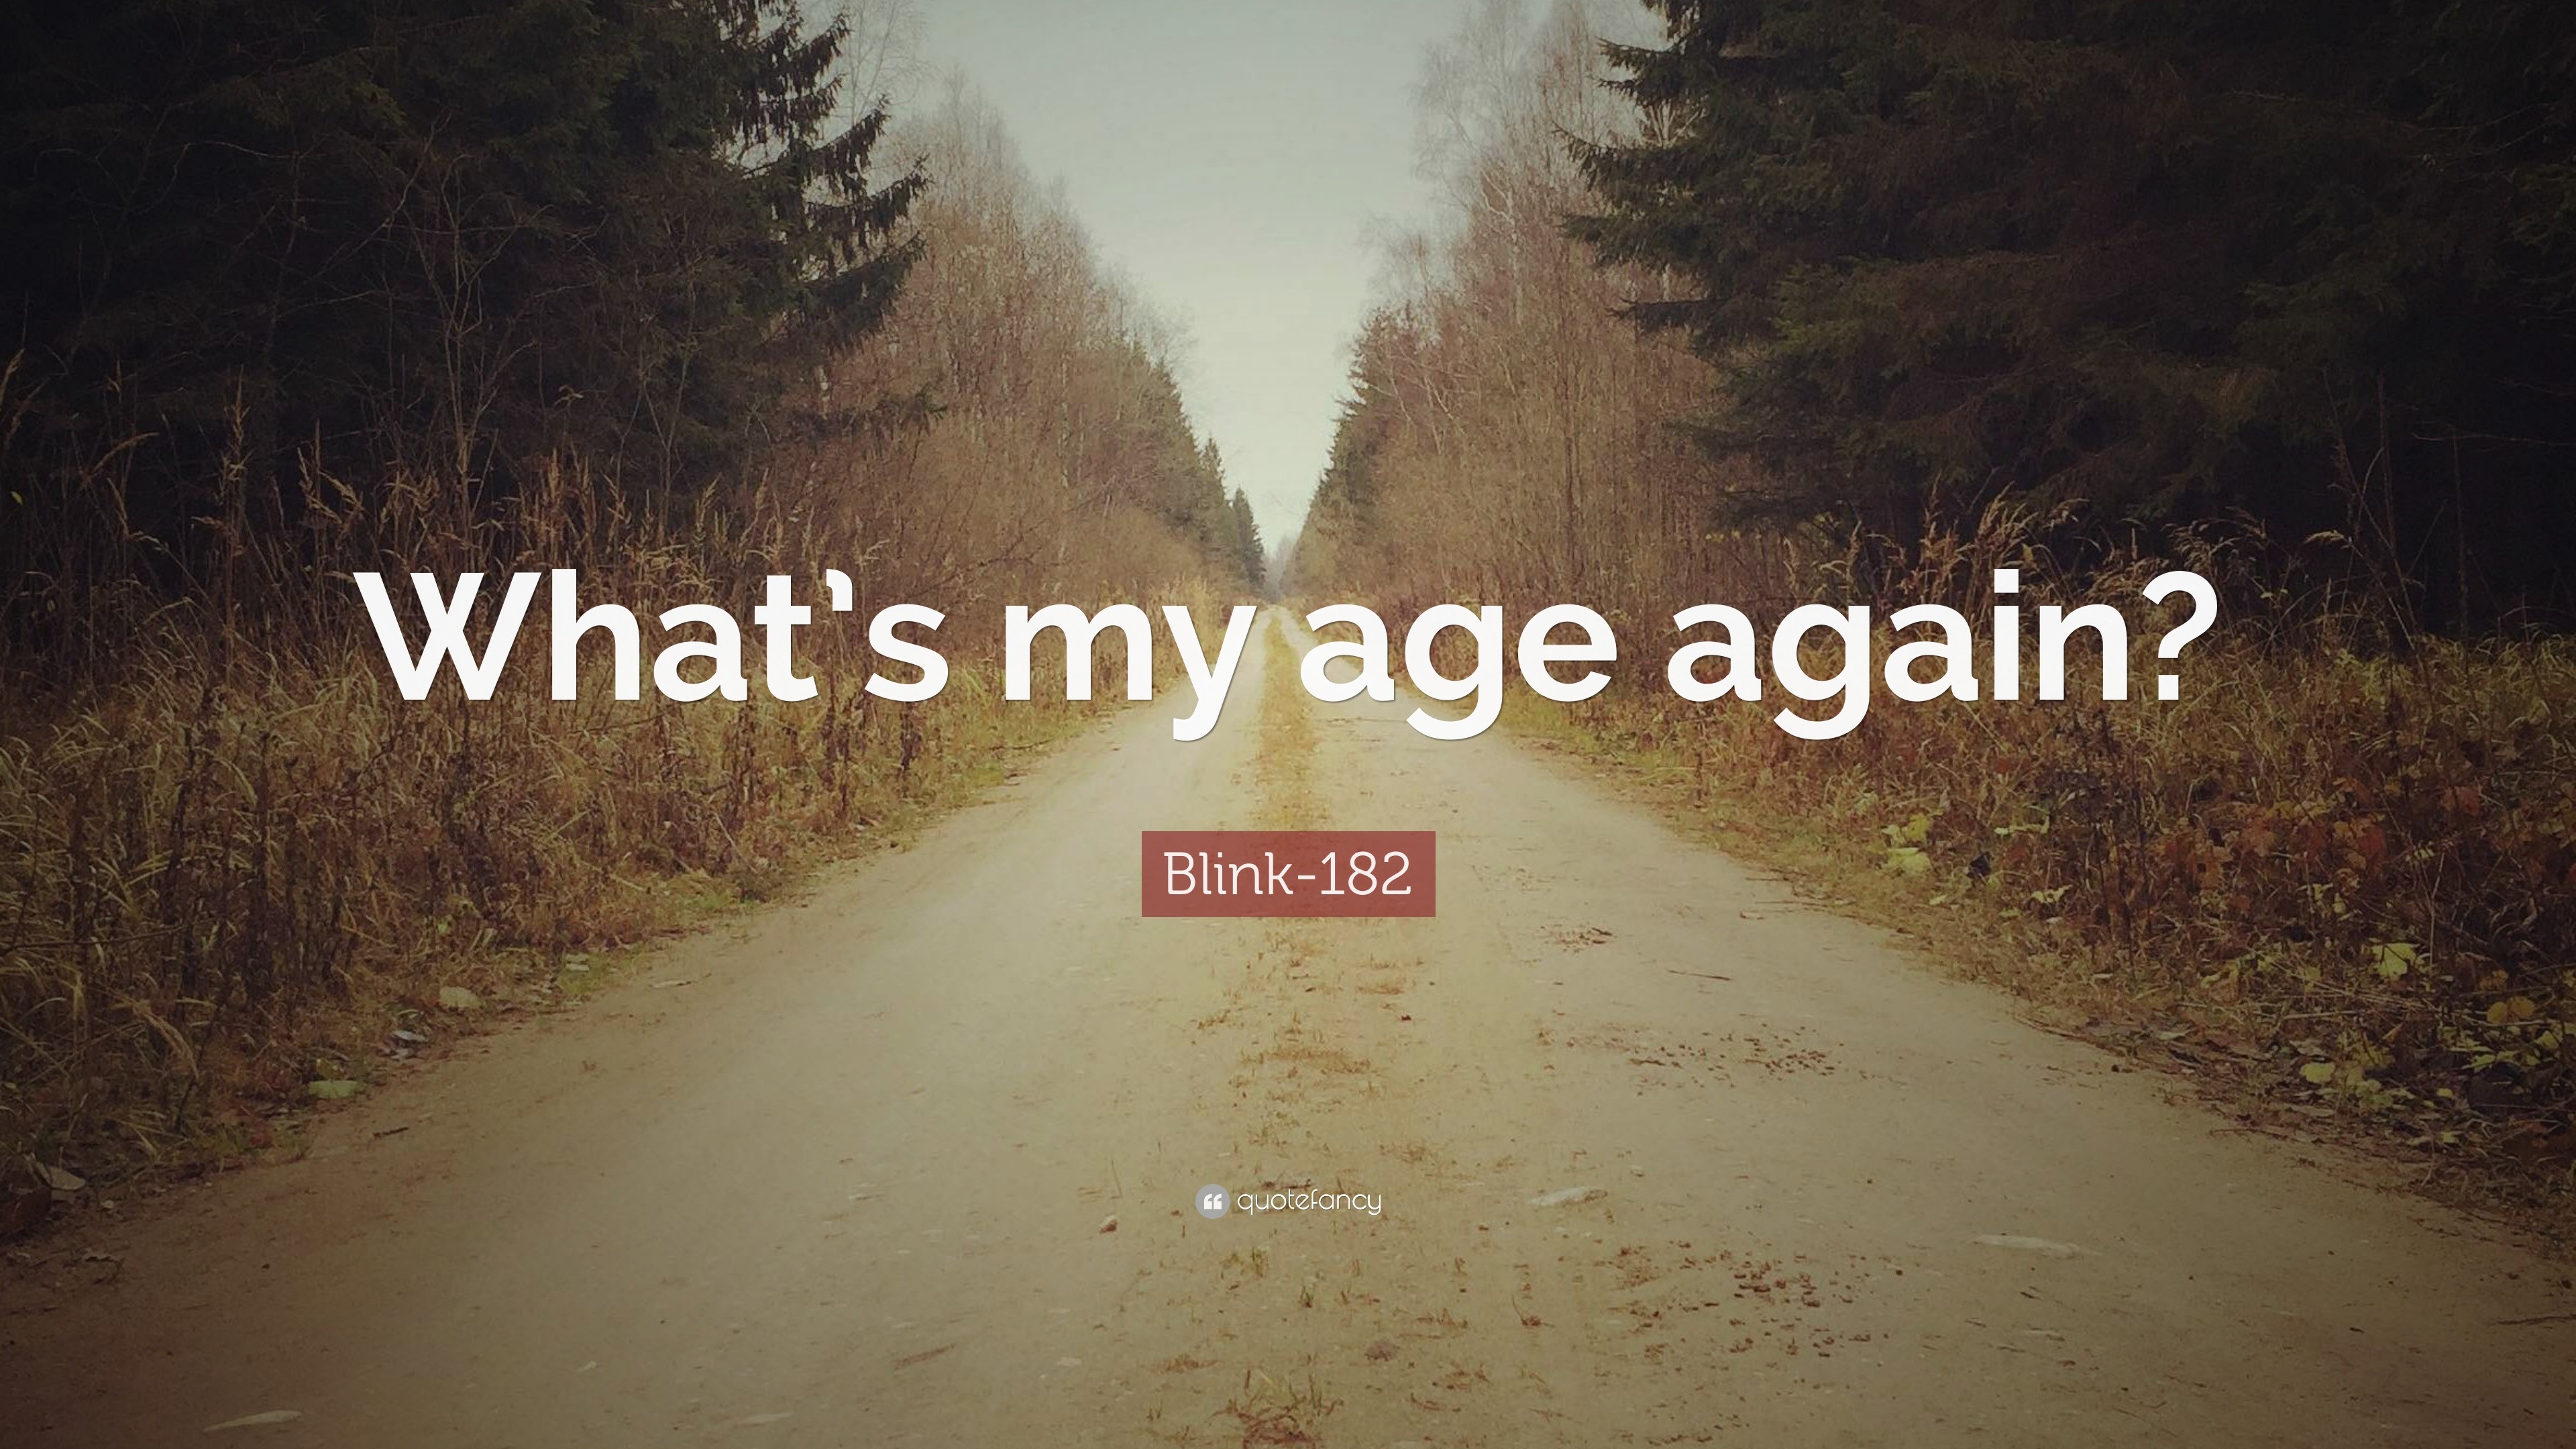 Blink-182 Quote: “What’s my age again?”